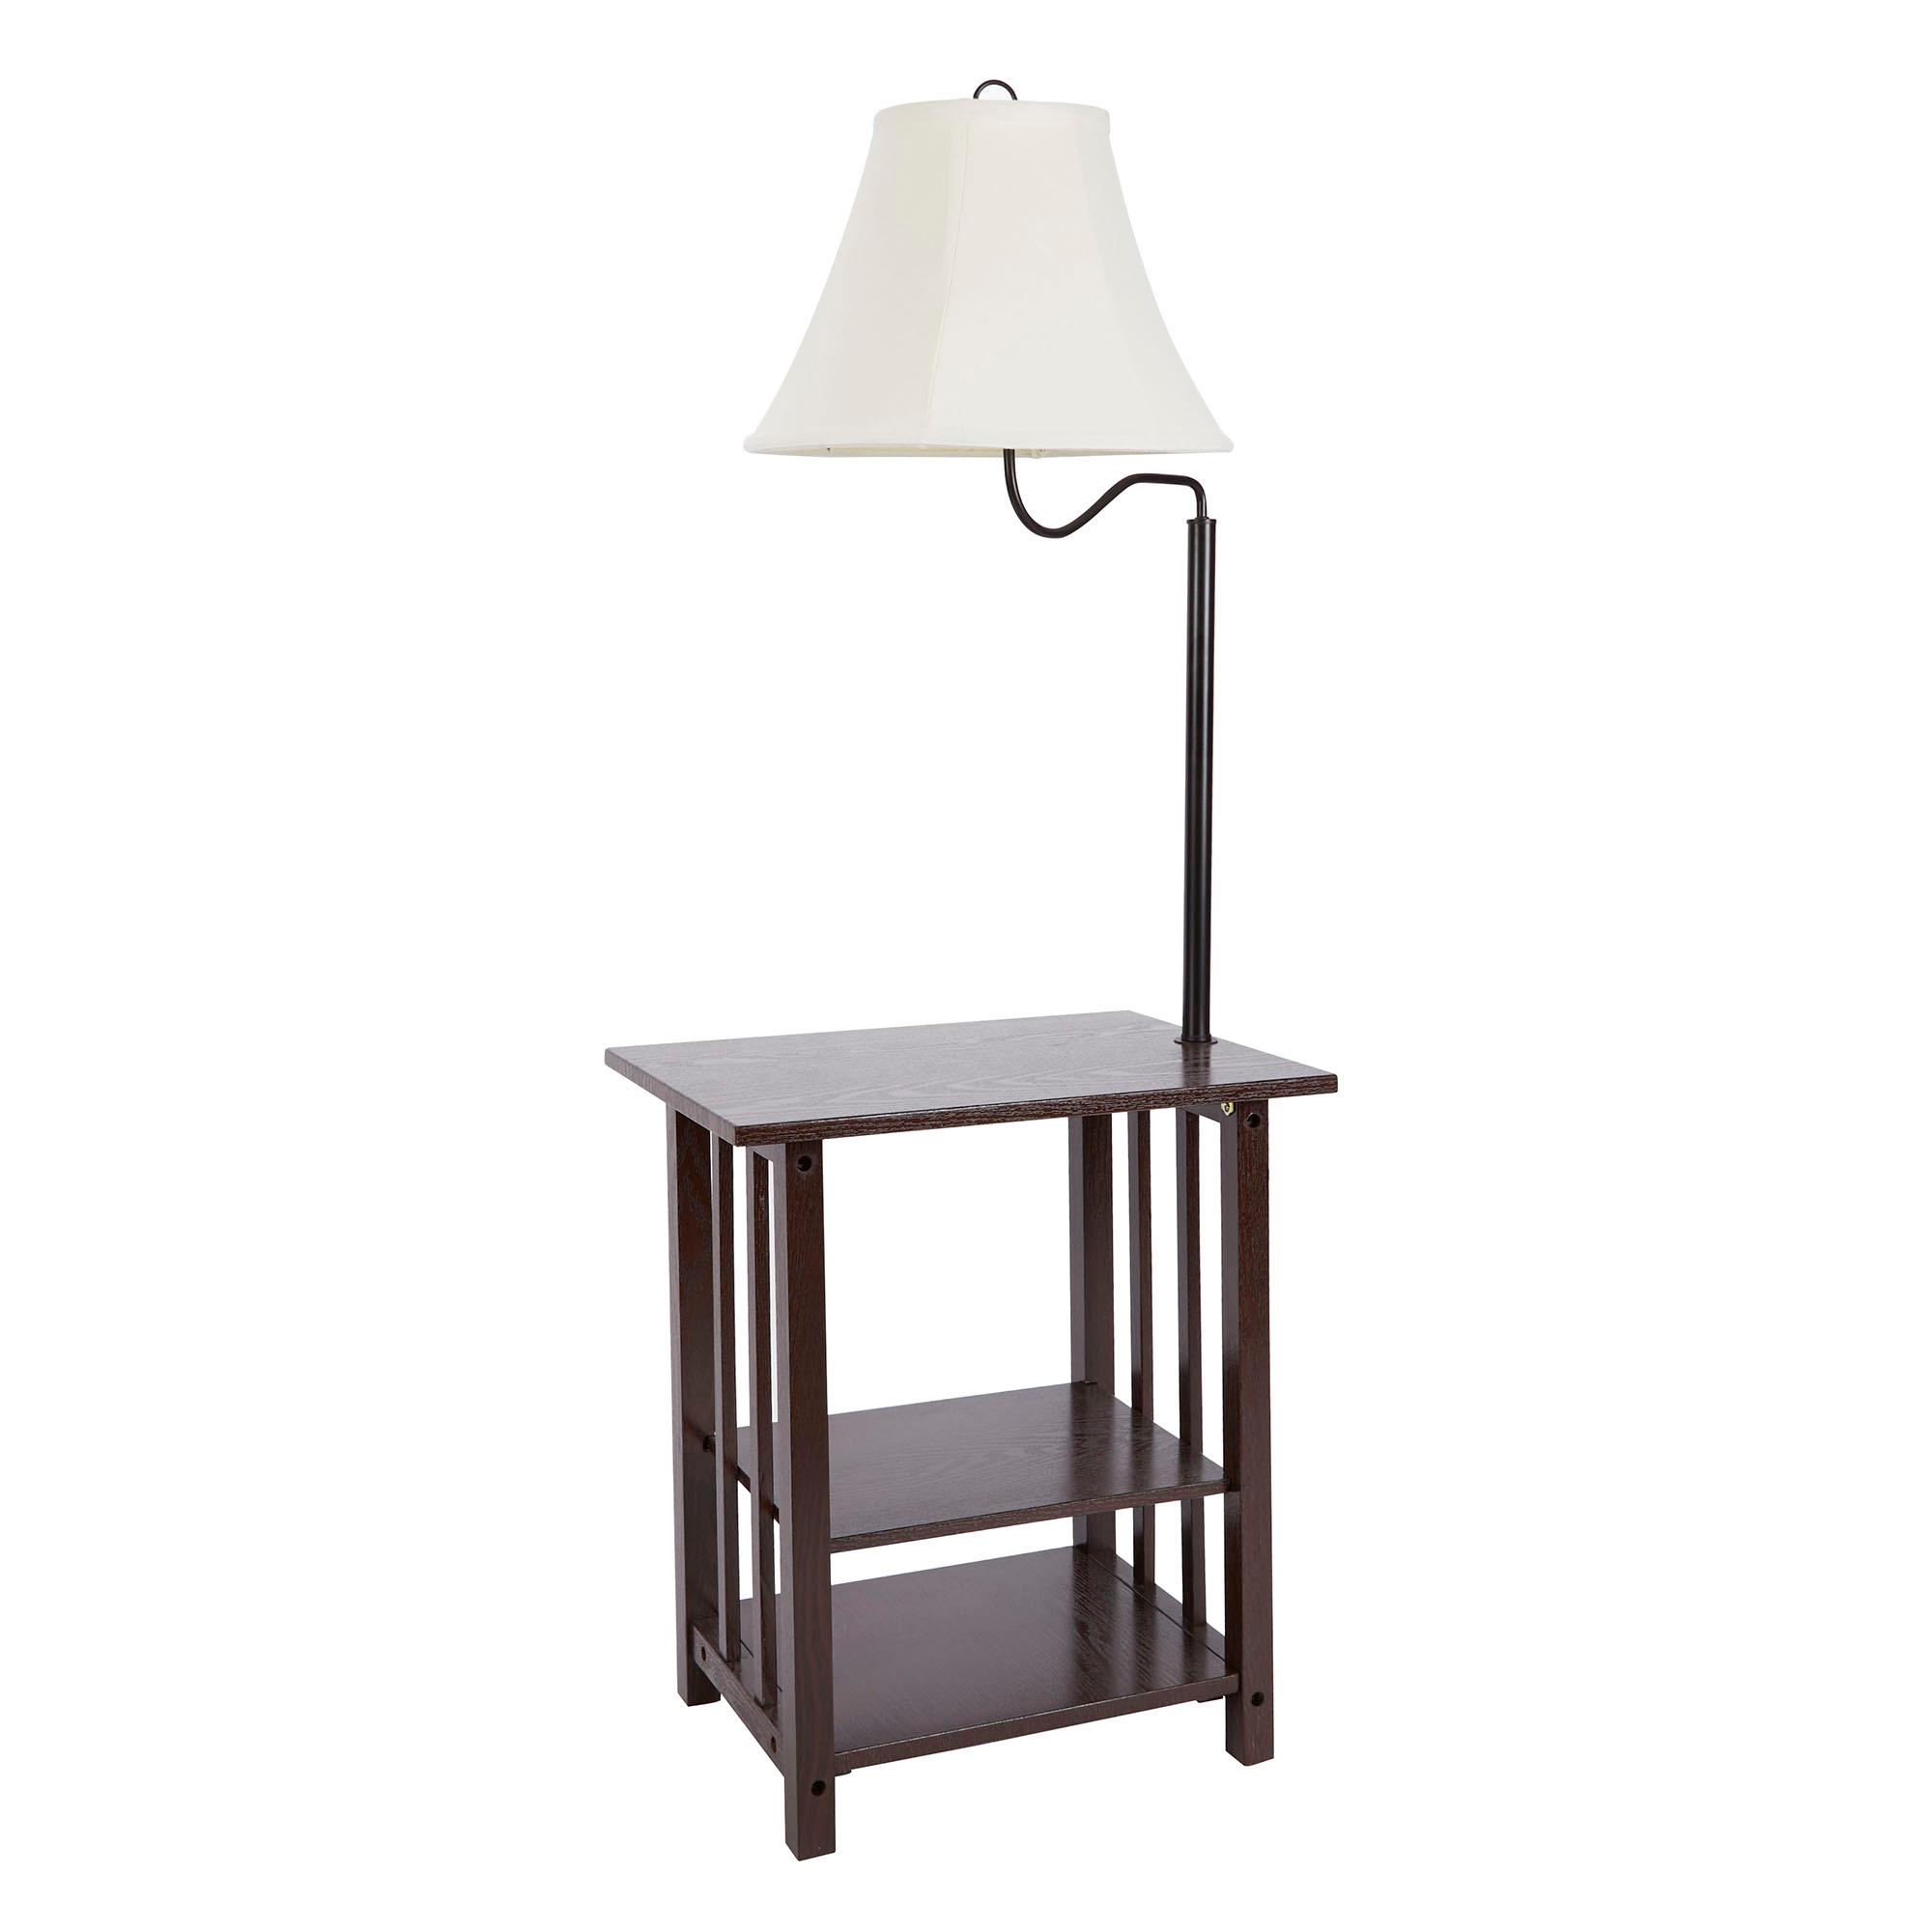 End table with attached lamp - 10 reasons to buy - Warisan Lighting